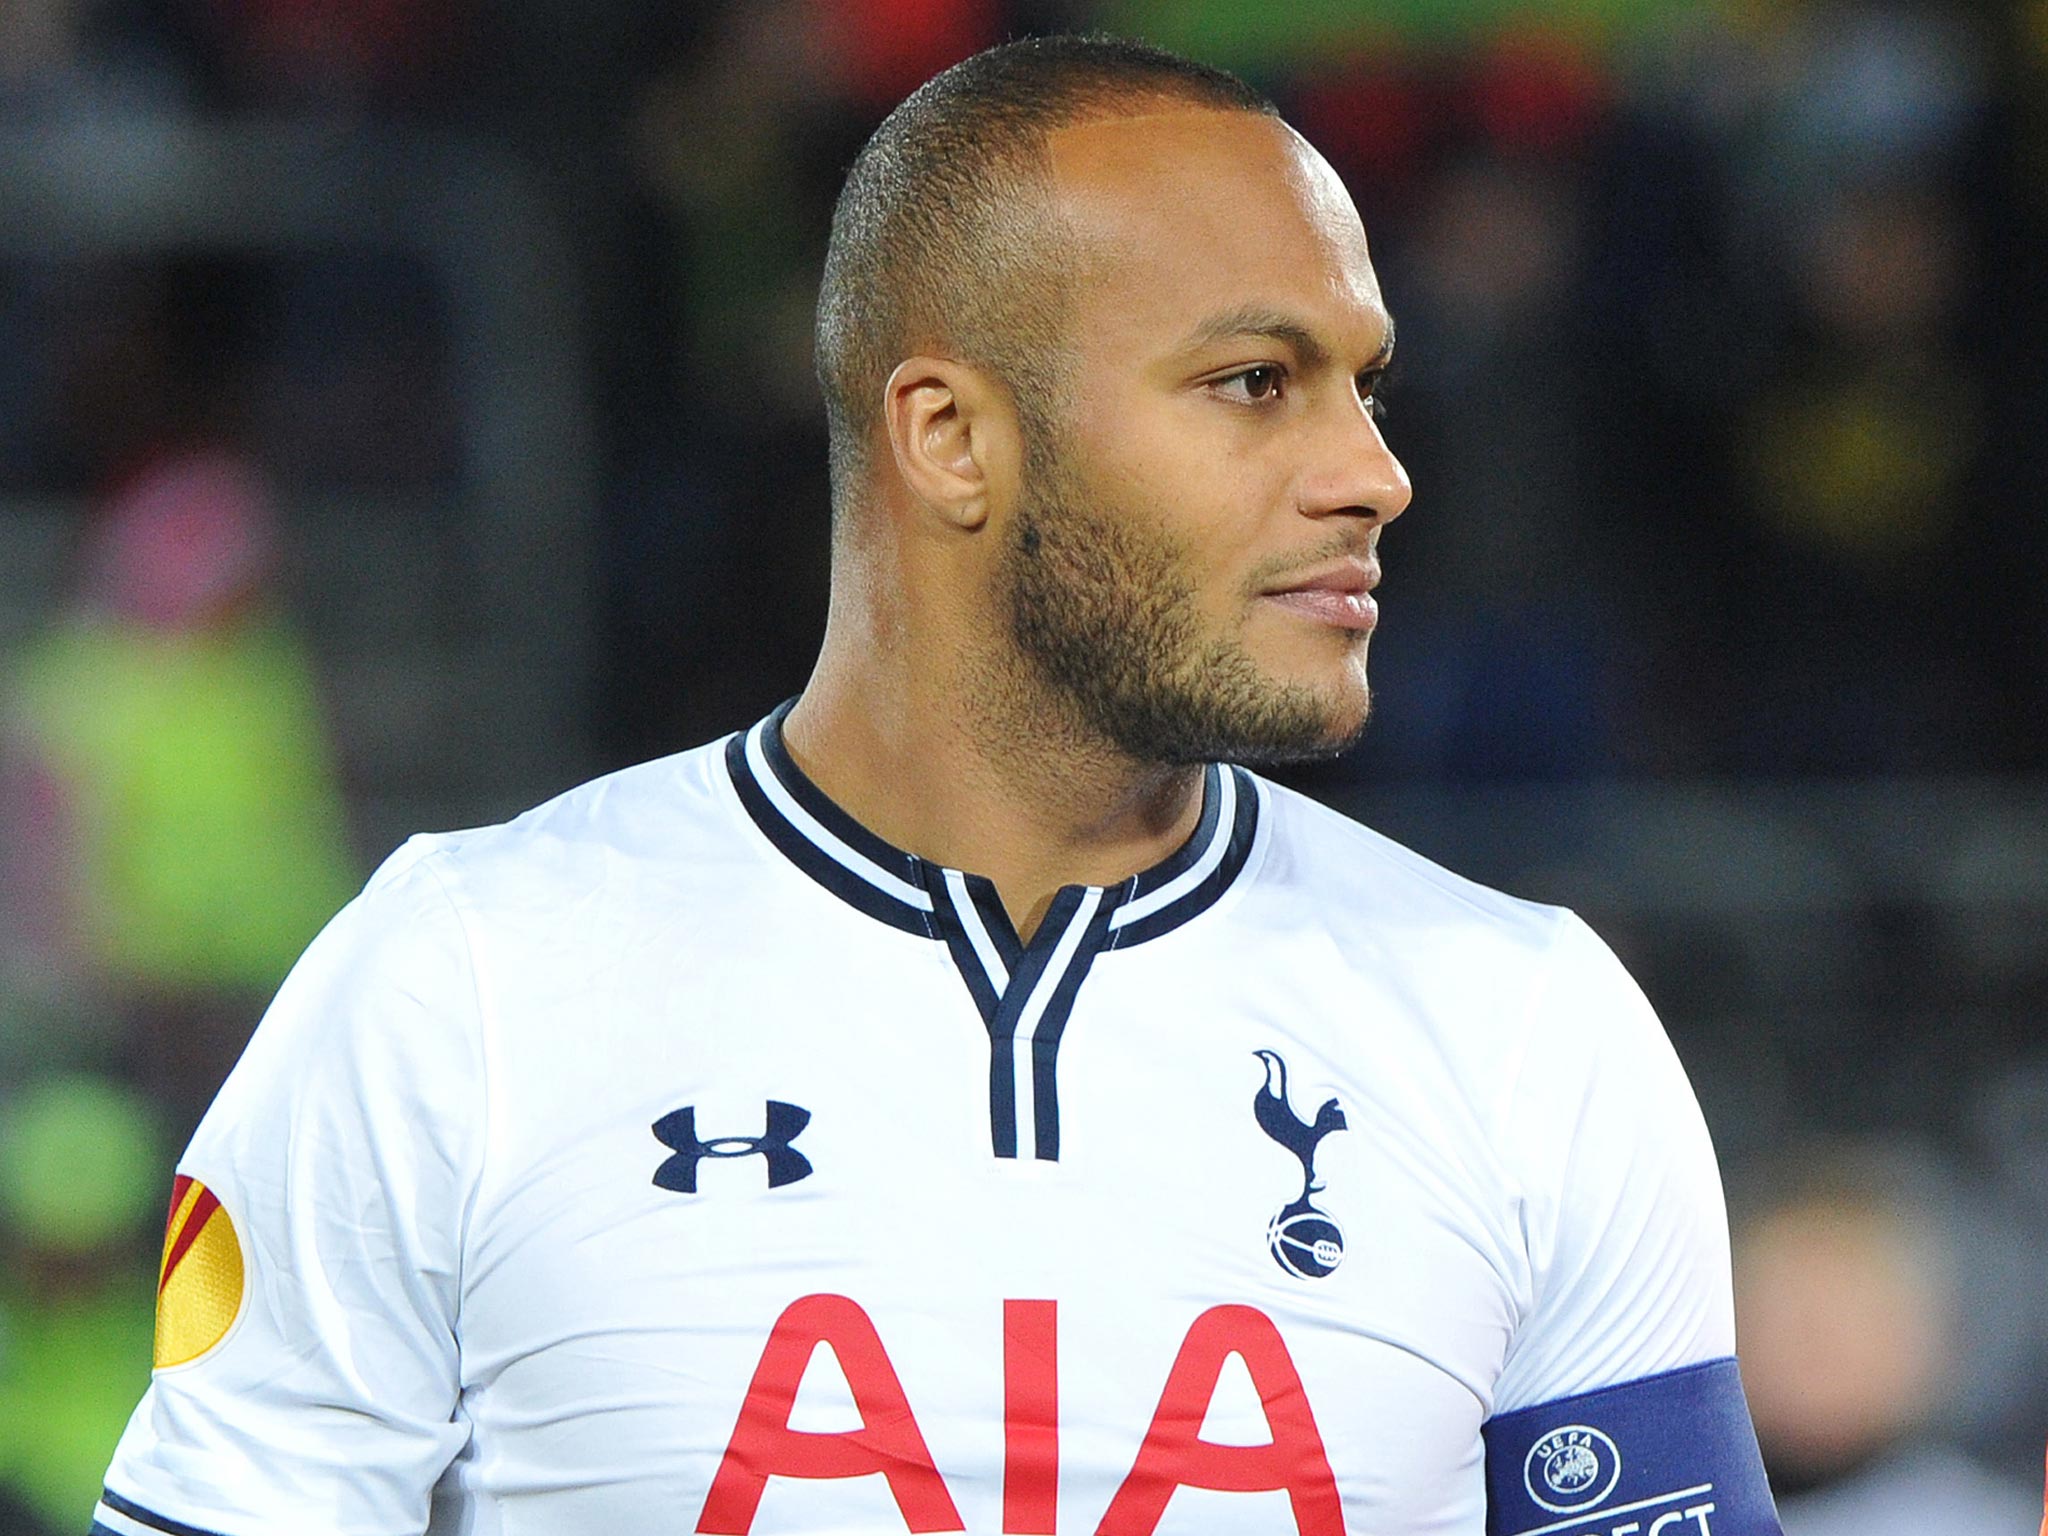 Younes Kaboul has been linked with a move to Arsenal from rivals Tottenham